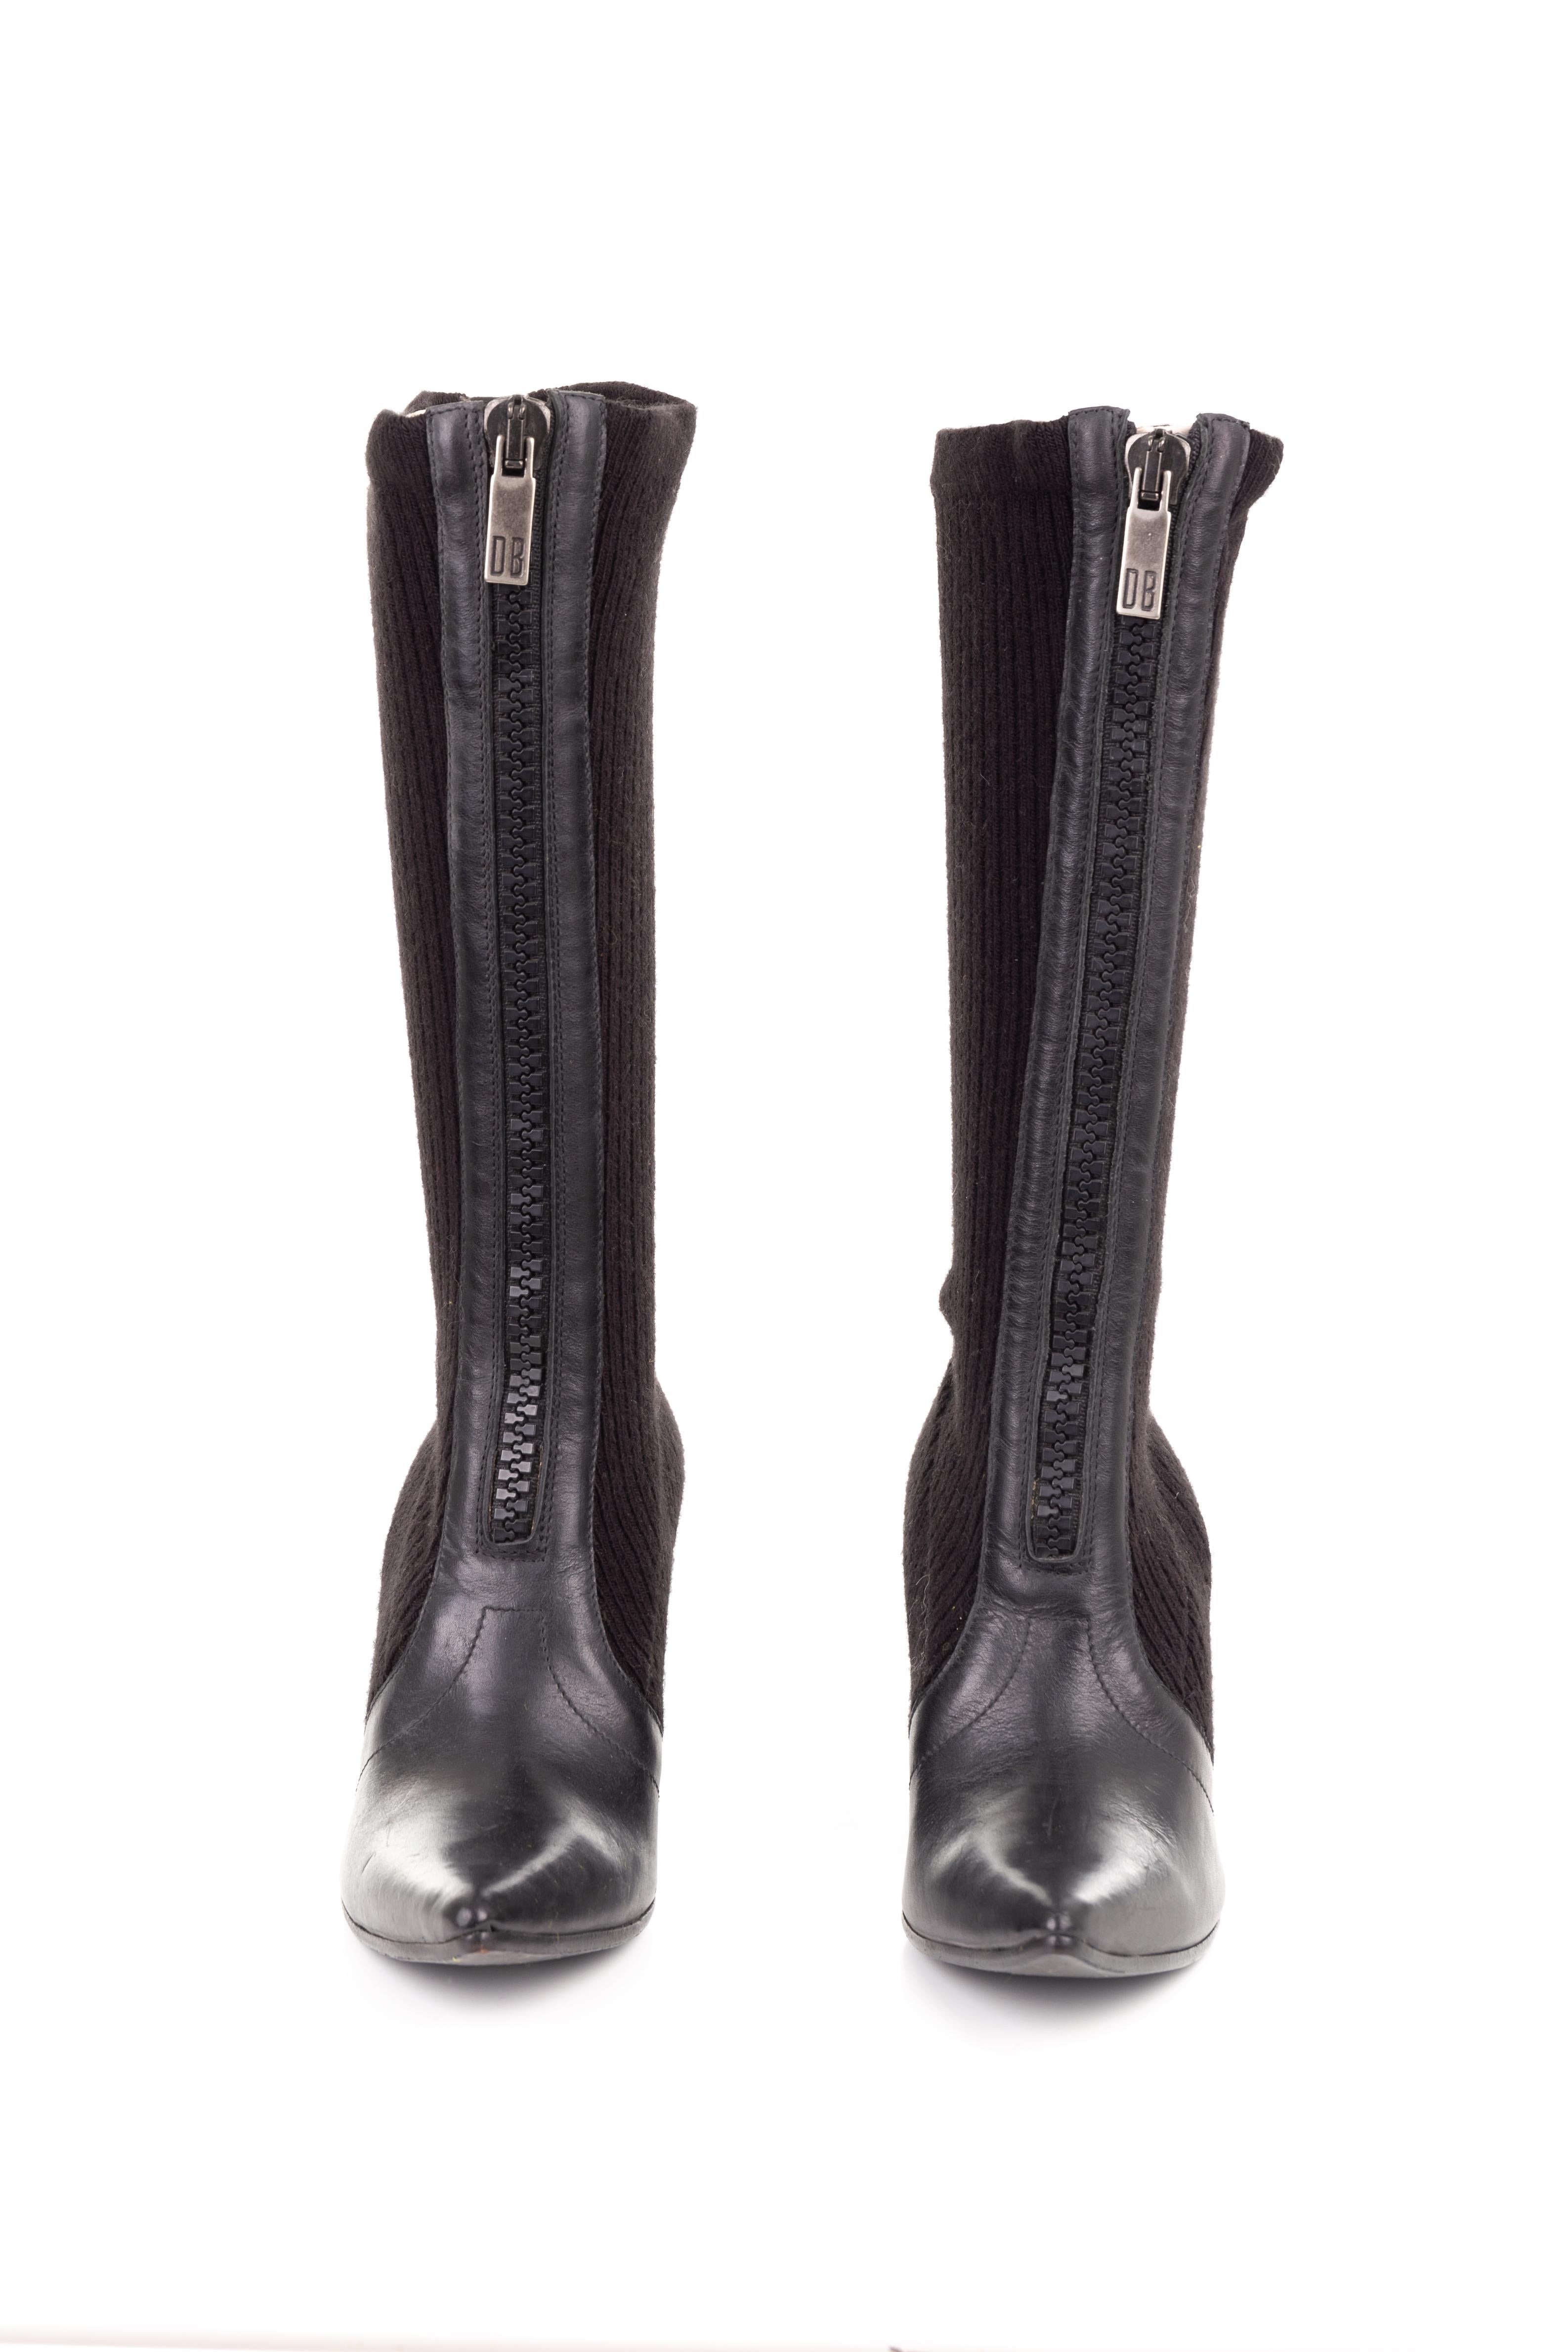 - Dirk Bikkembergs Fall Winter 2003 collection
- Sold by Gold Palms Vintage
- Black wool rib knit boots
- Leather point toe
- Wedge heel
- Front zipper fastening
- Size: 37 / US 6.5 / UK 4.5